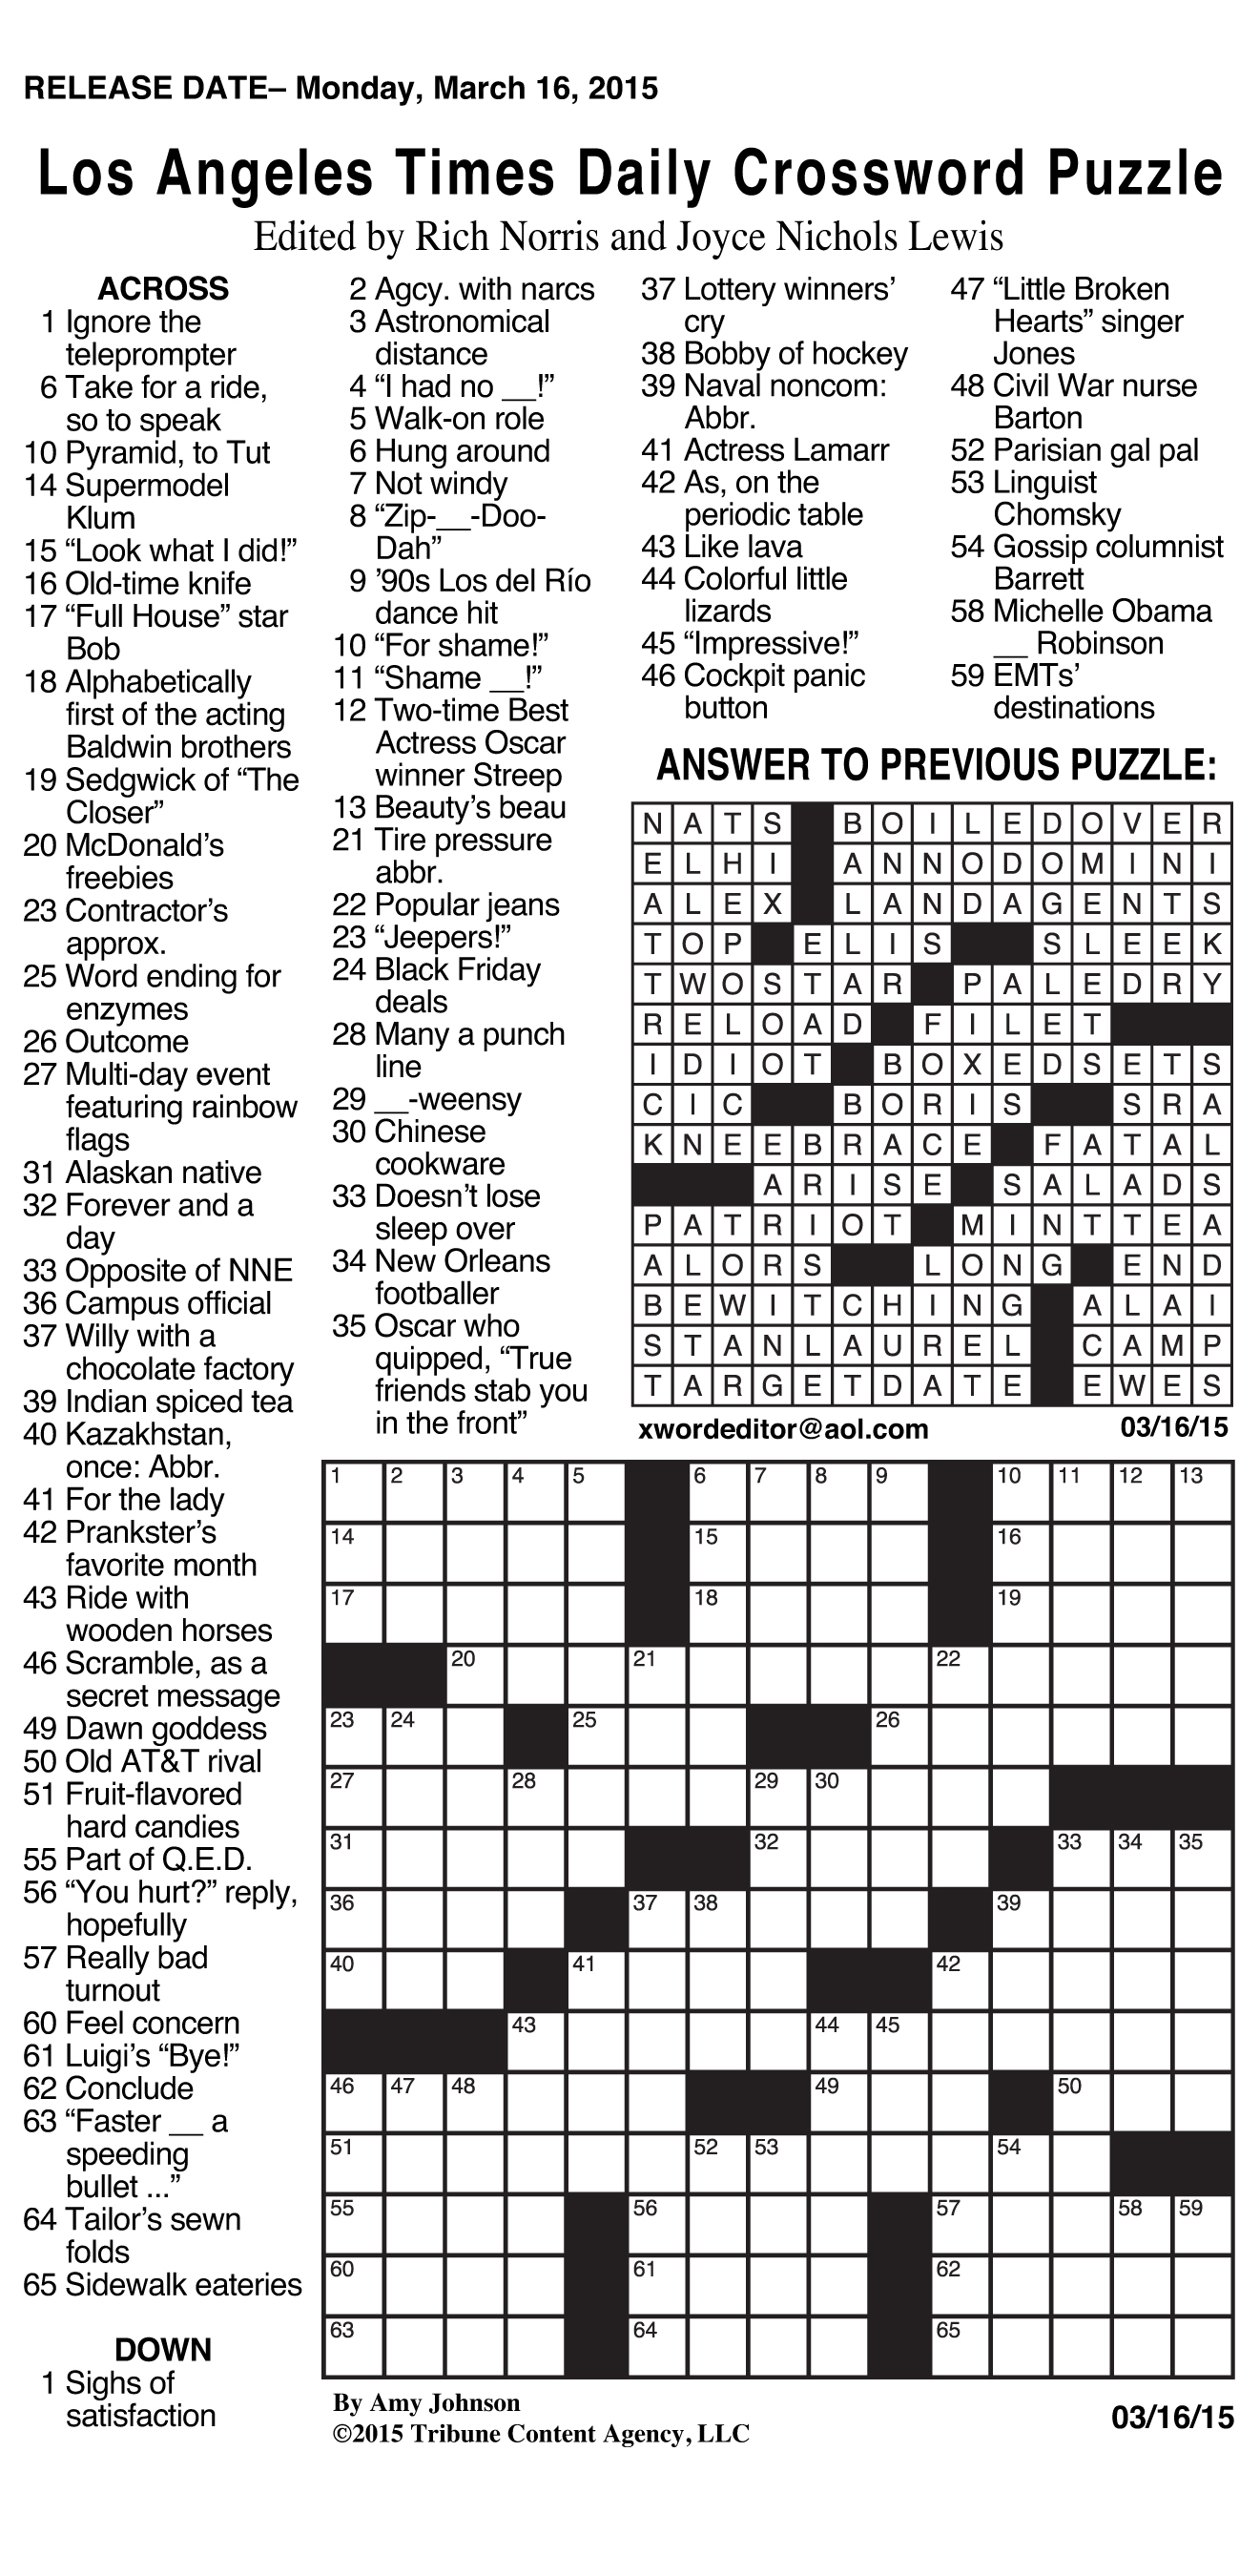 Sample Of Los Angeles Times Daily Crossword Puzzle | Tribune Content - Printable Crossword Puzzles 1978